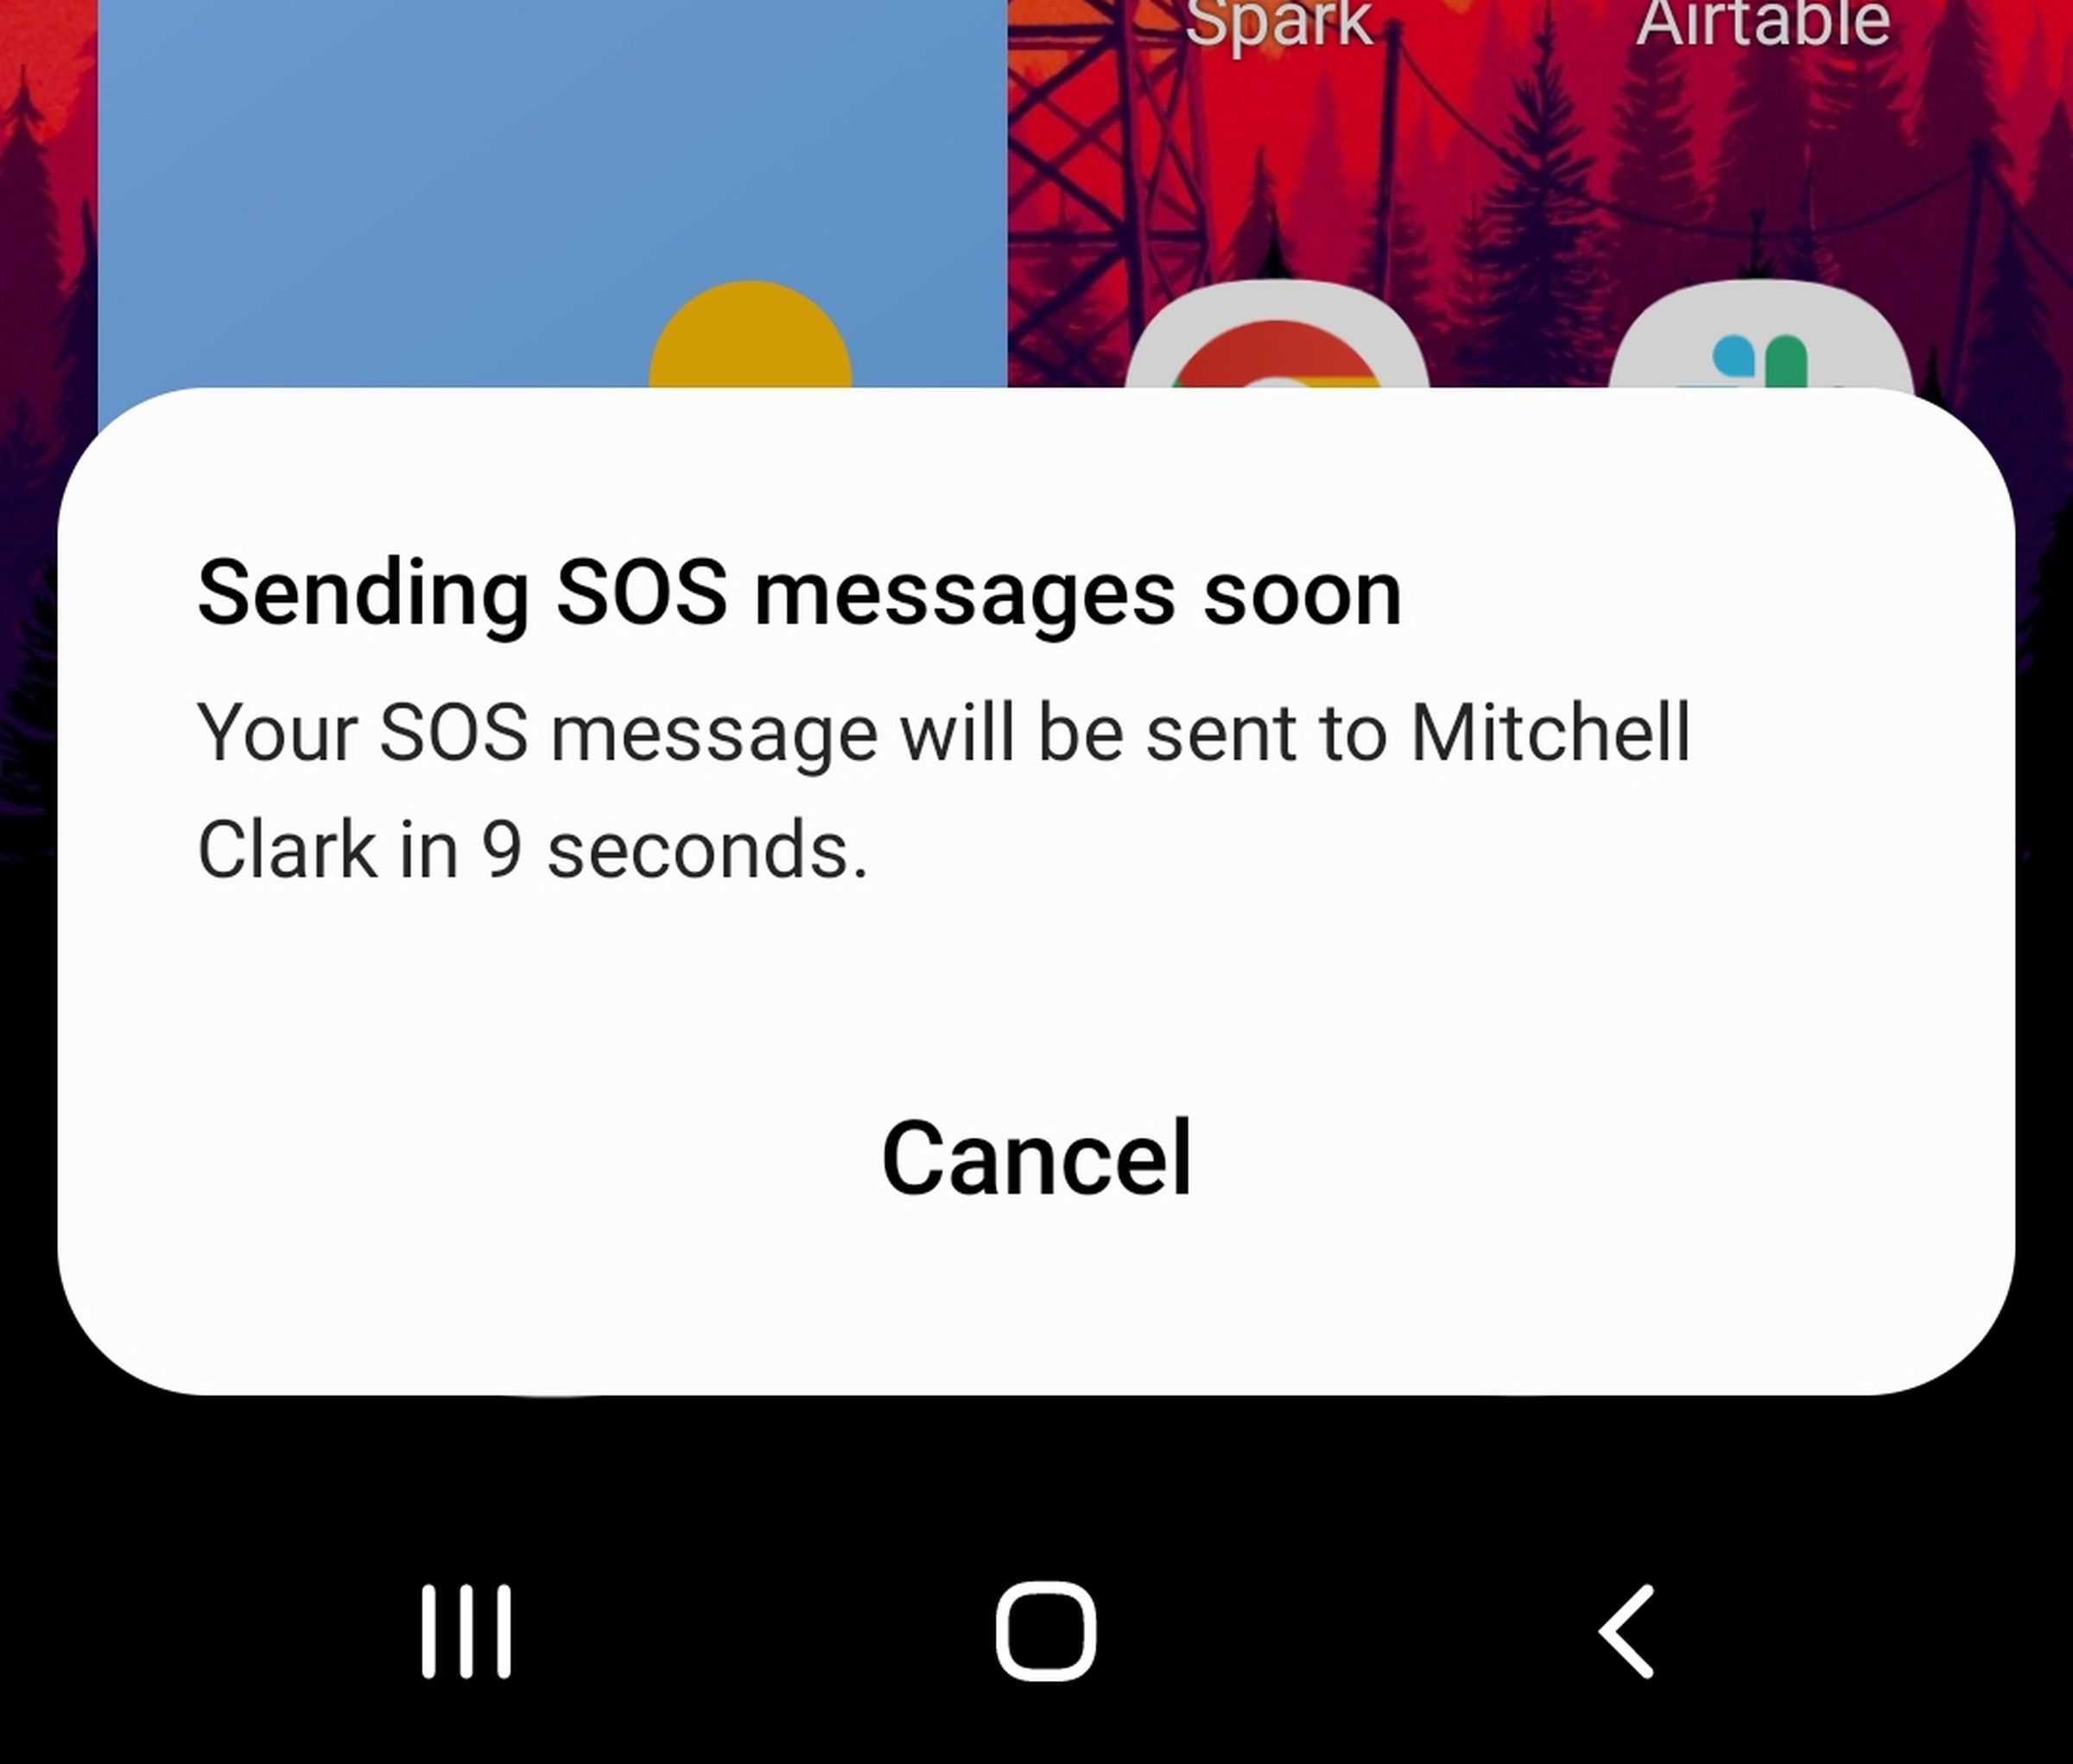 Image showing a dialog box that reads: “Sending SOS messages soon. Your SOS message will be sent to Mitchell Clark in 9 seconds,” followed by a cancel button.